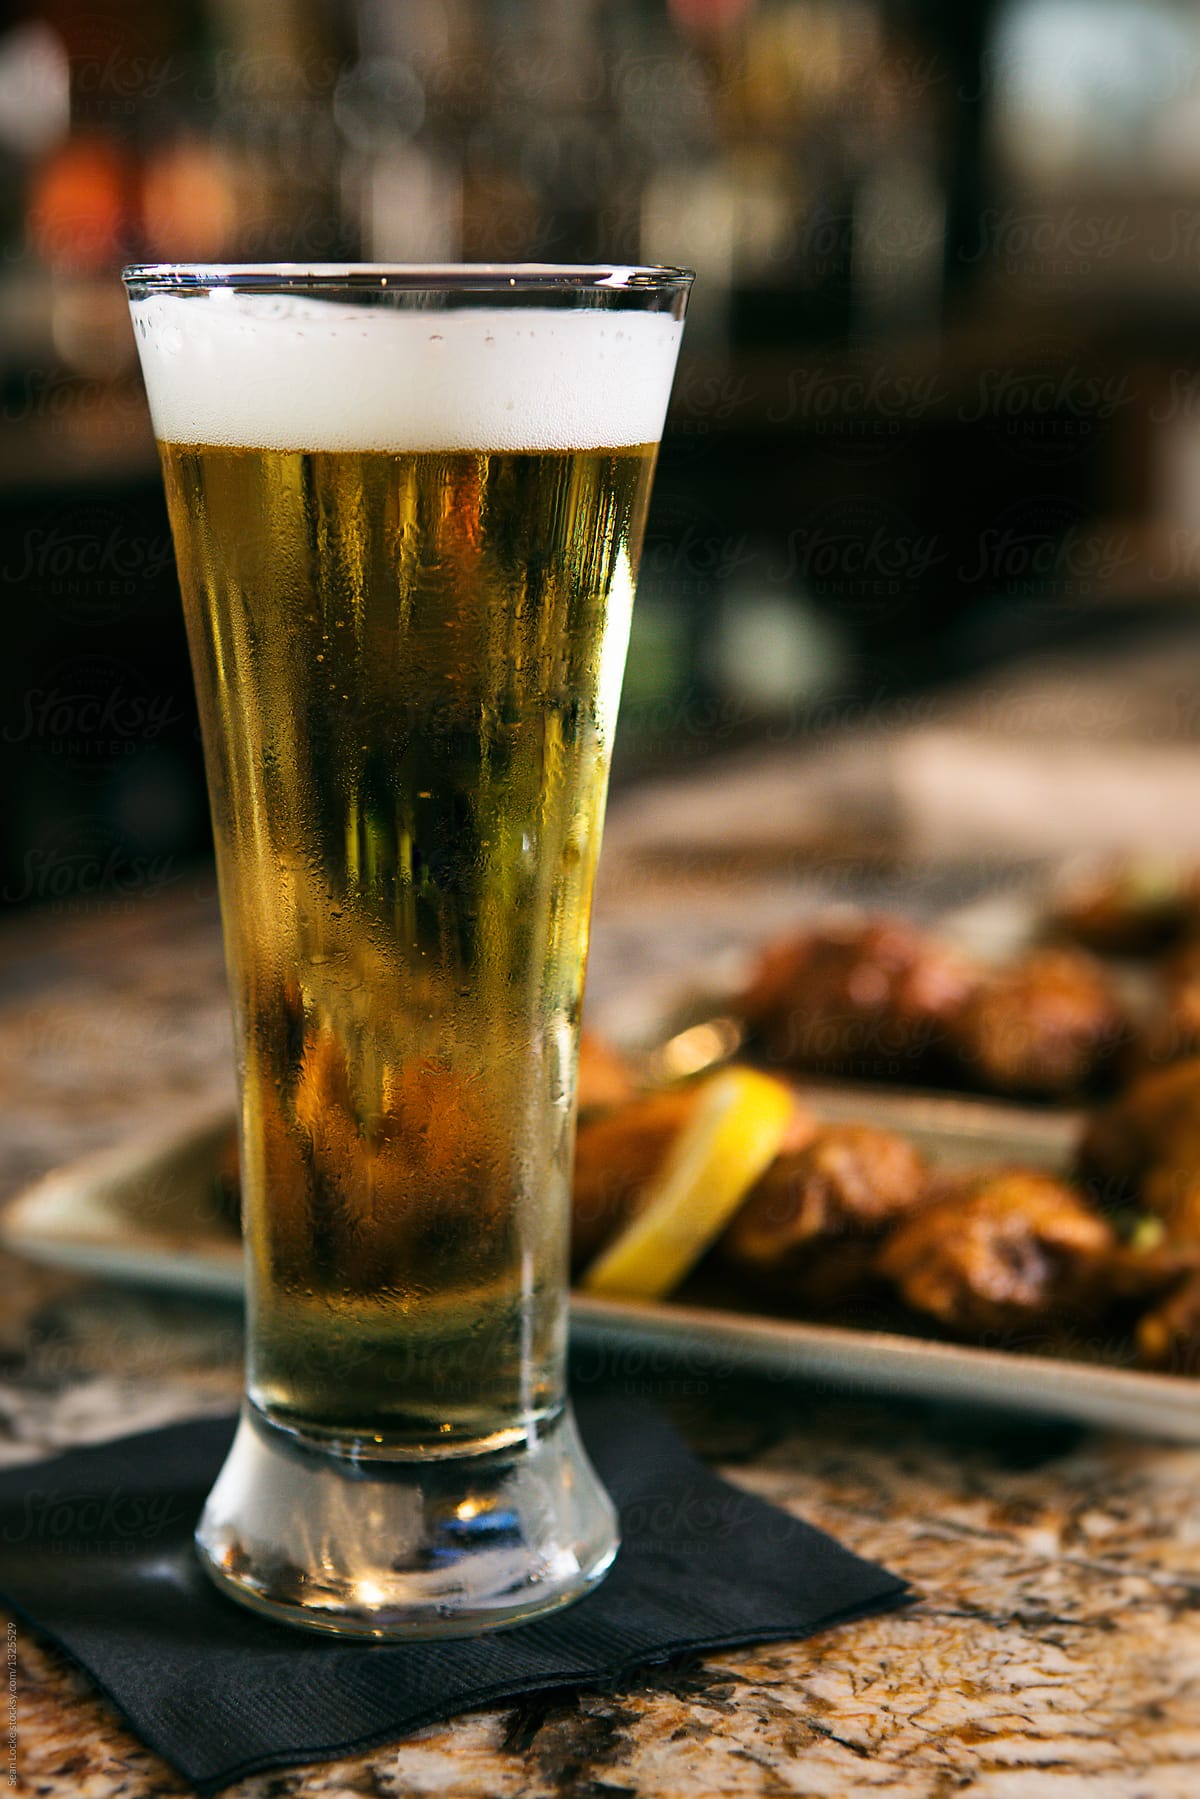 Restaurant: Tall Glass Of Beer In Front Of Chicken Wings